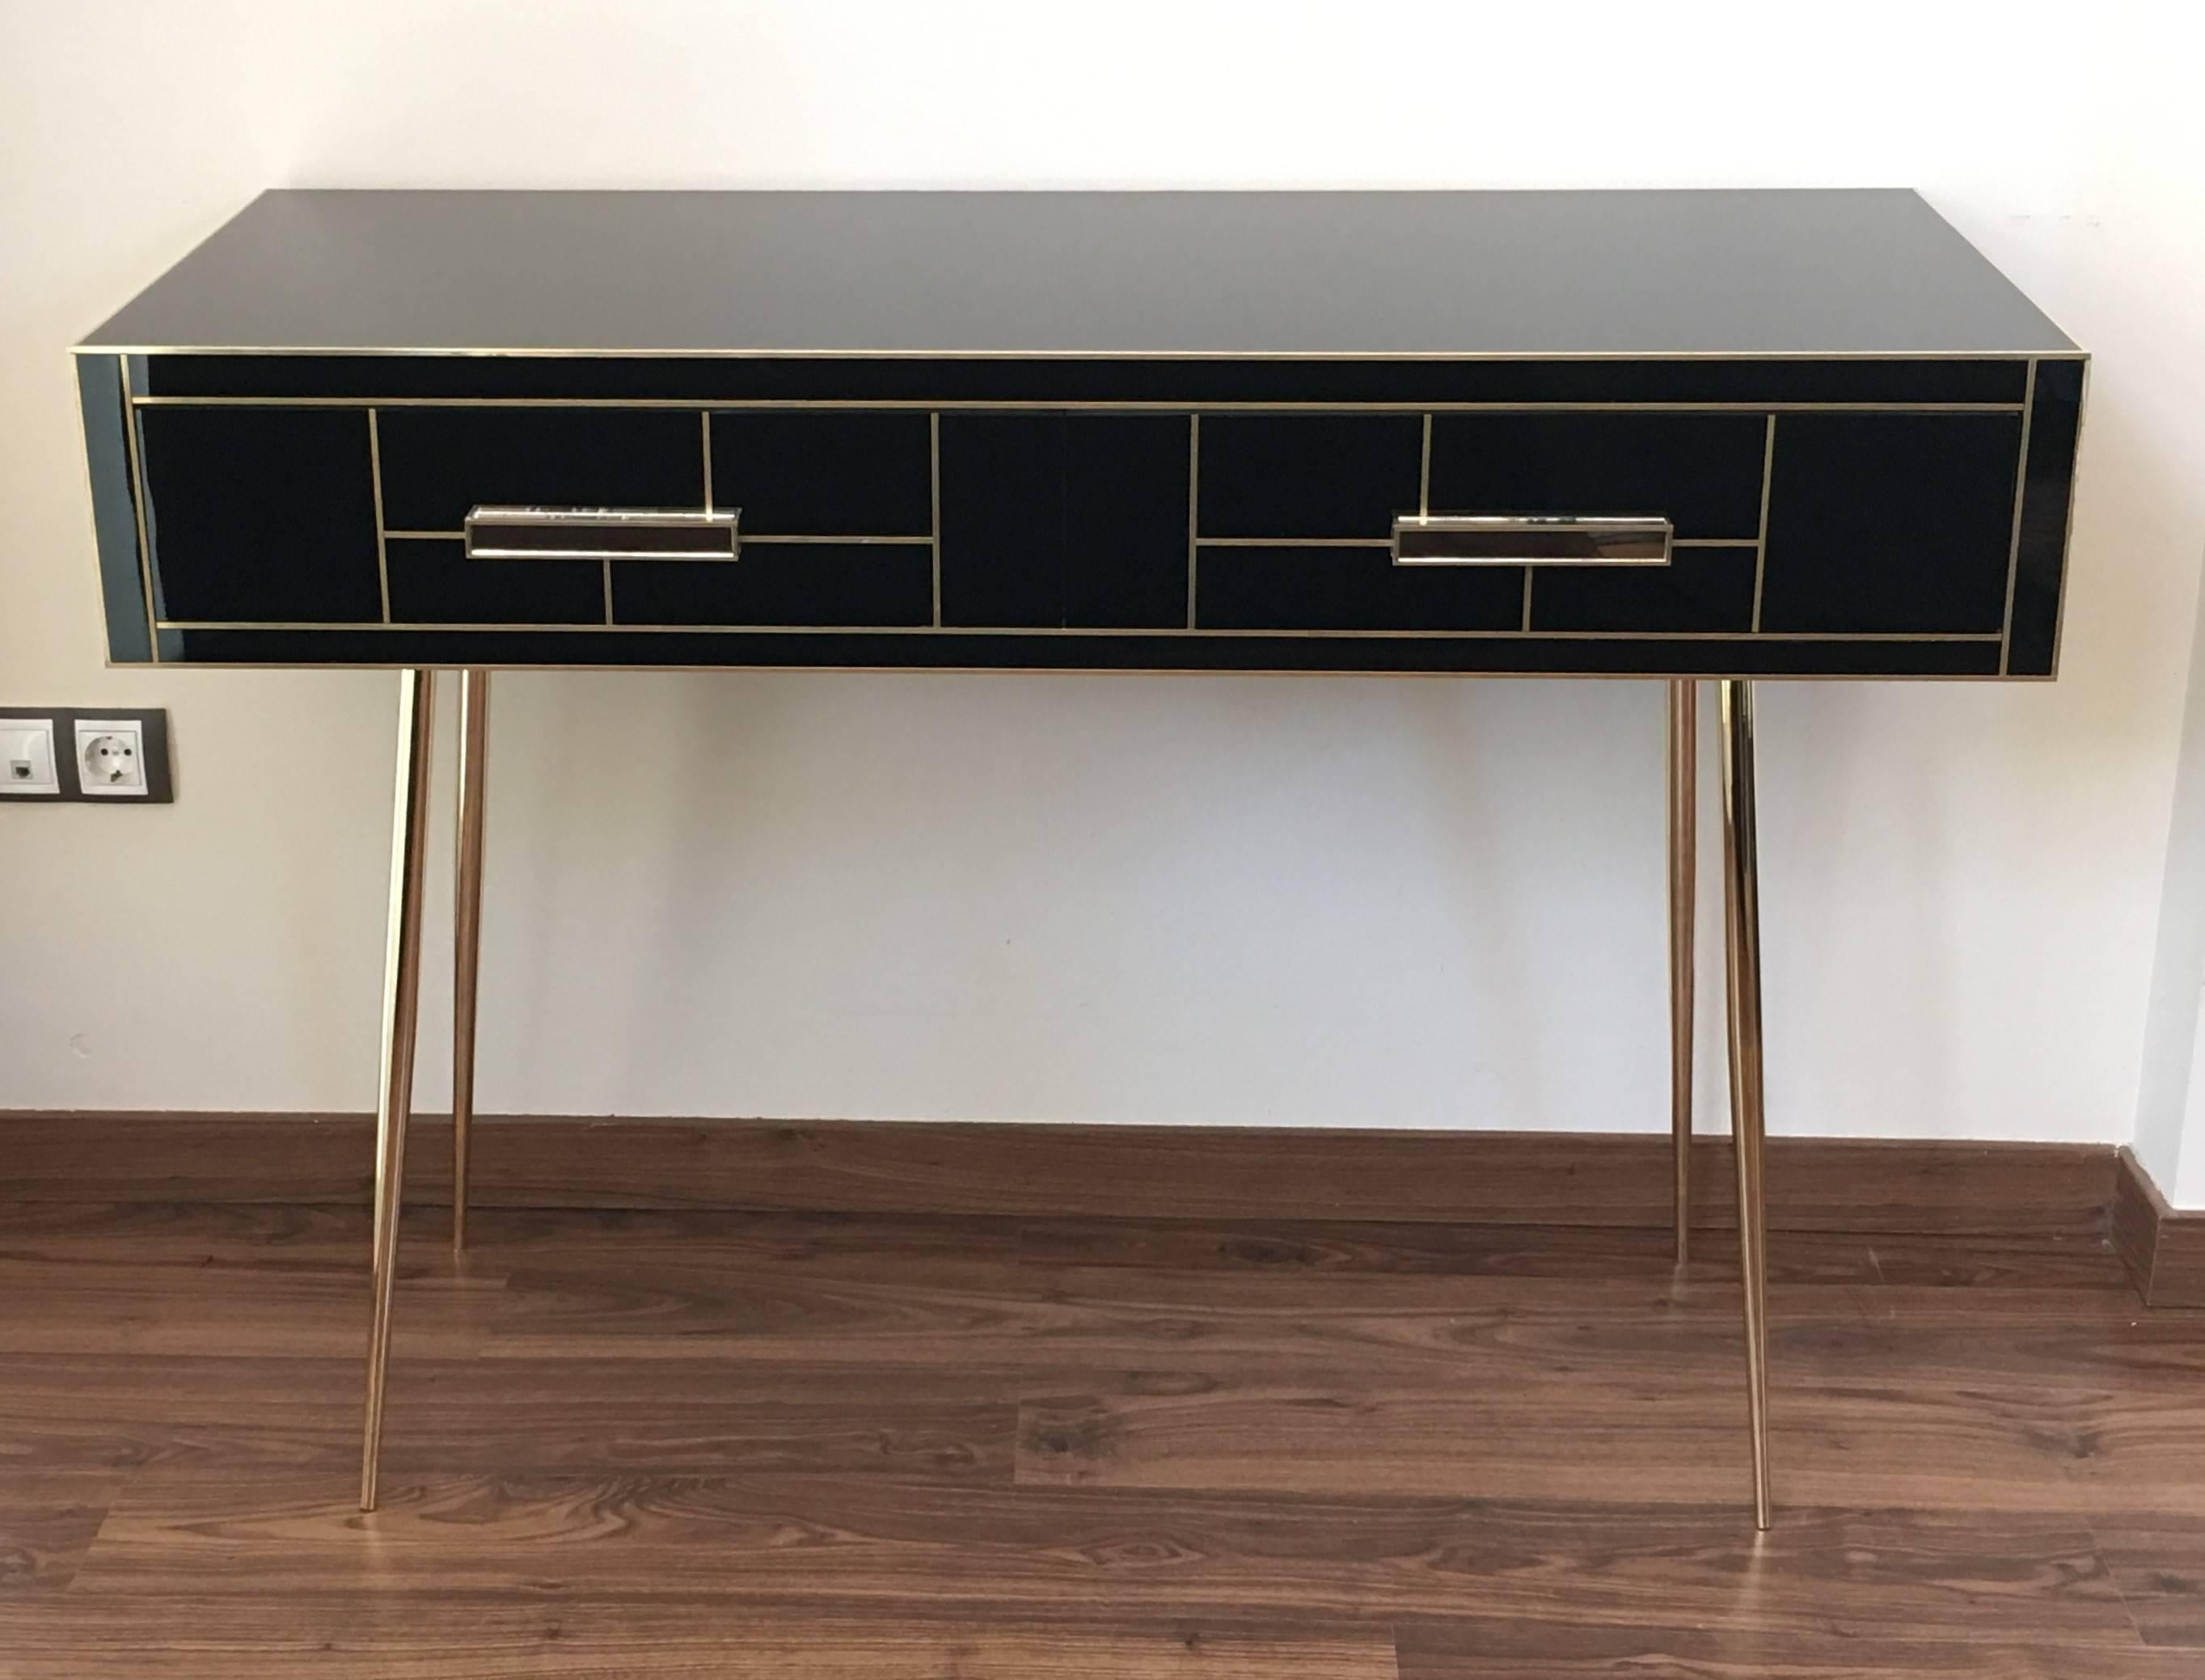 Handmade desk with two drawers with brake.
It´s also black mirrored behind.
The handles and the endless of the drawers are made in mirror.
The brass legs are very resistants.

Measures: Height of the leg: 25.5in.